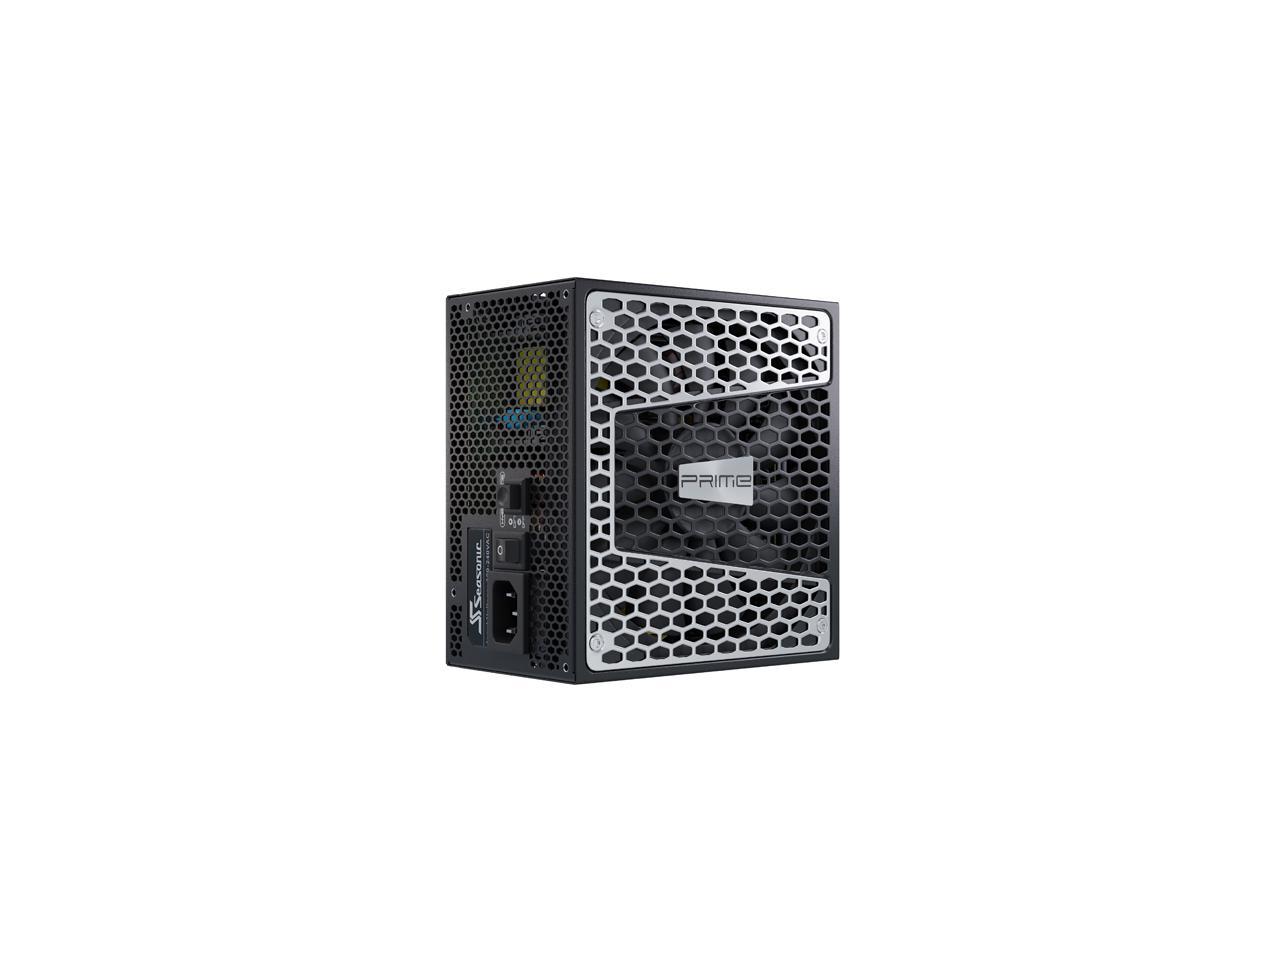 Seasonic PRIME GX-750, 750W 80+ Gold, Full Modular, Fan Control in Fanless, Silent, and Cooling Mode, 12 Year Warranty, Perfect Power Supply for Gaming and High-Performance Systems, SSR-750GD2.